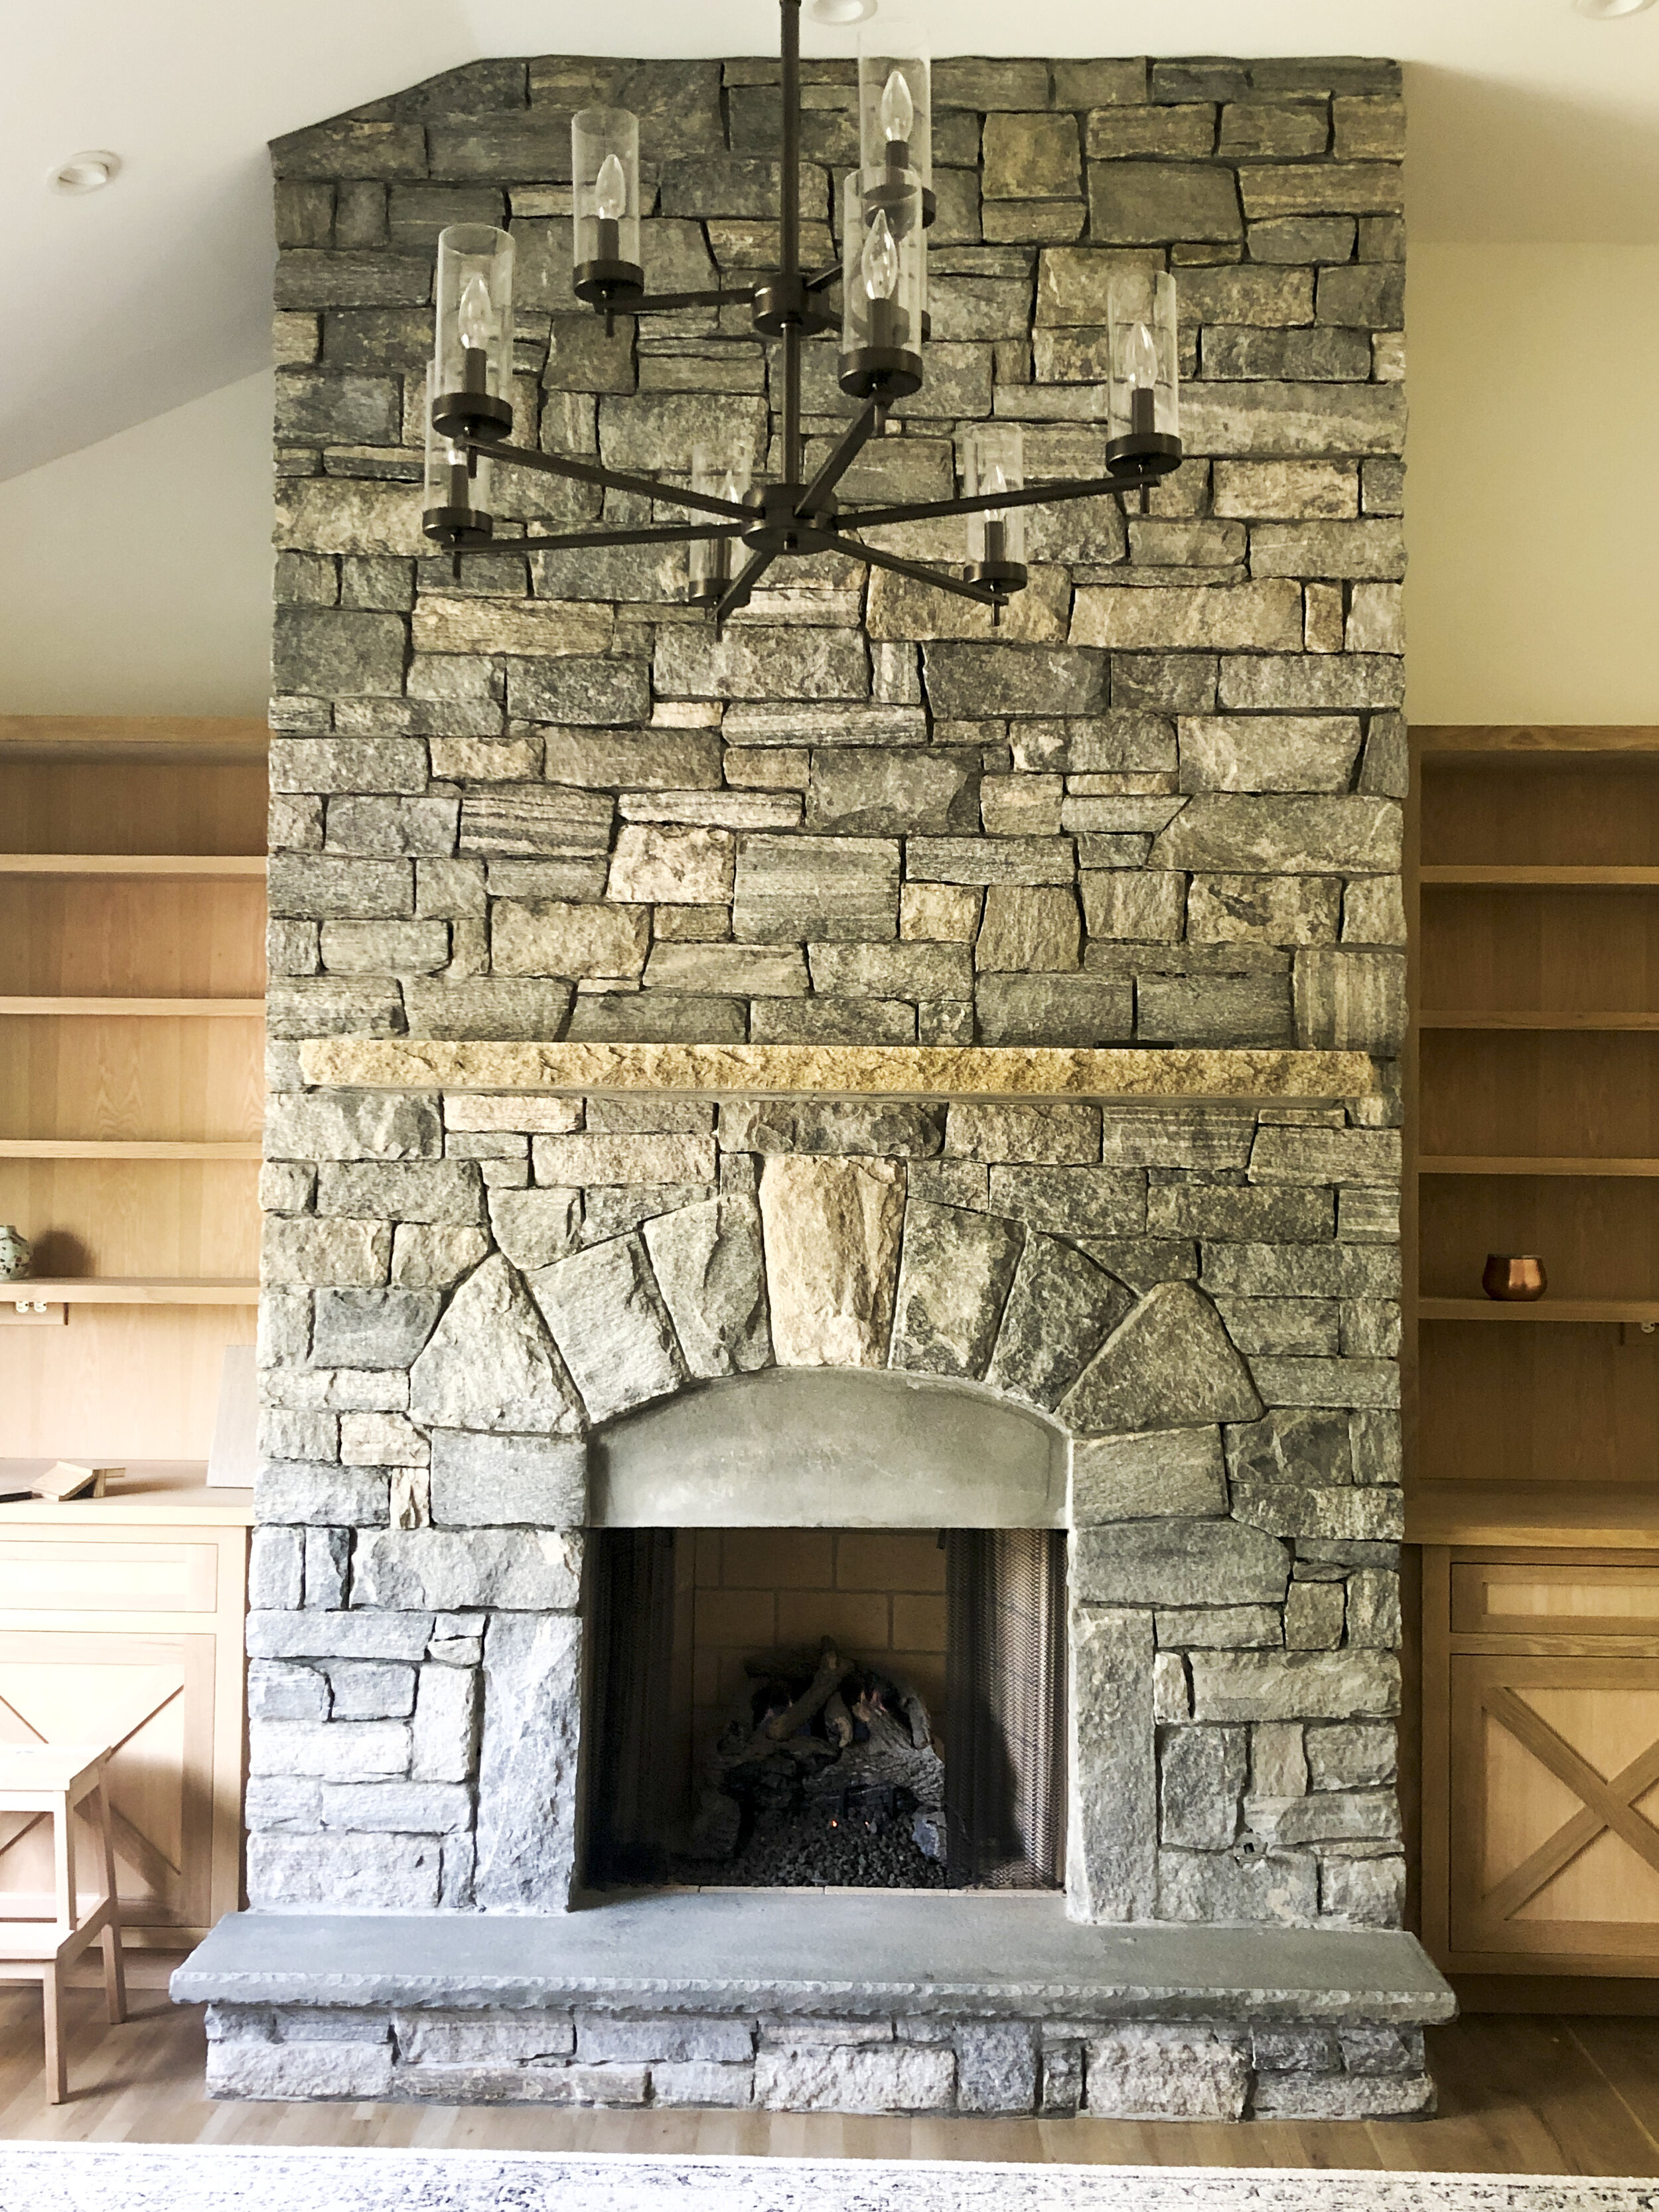  Ventless fireplace with a traditional look.  